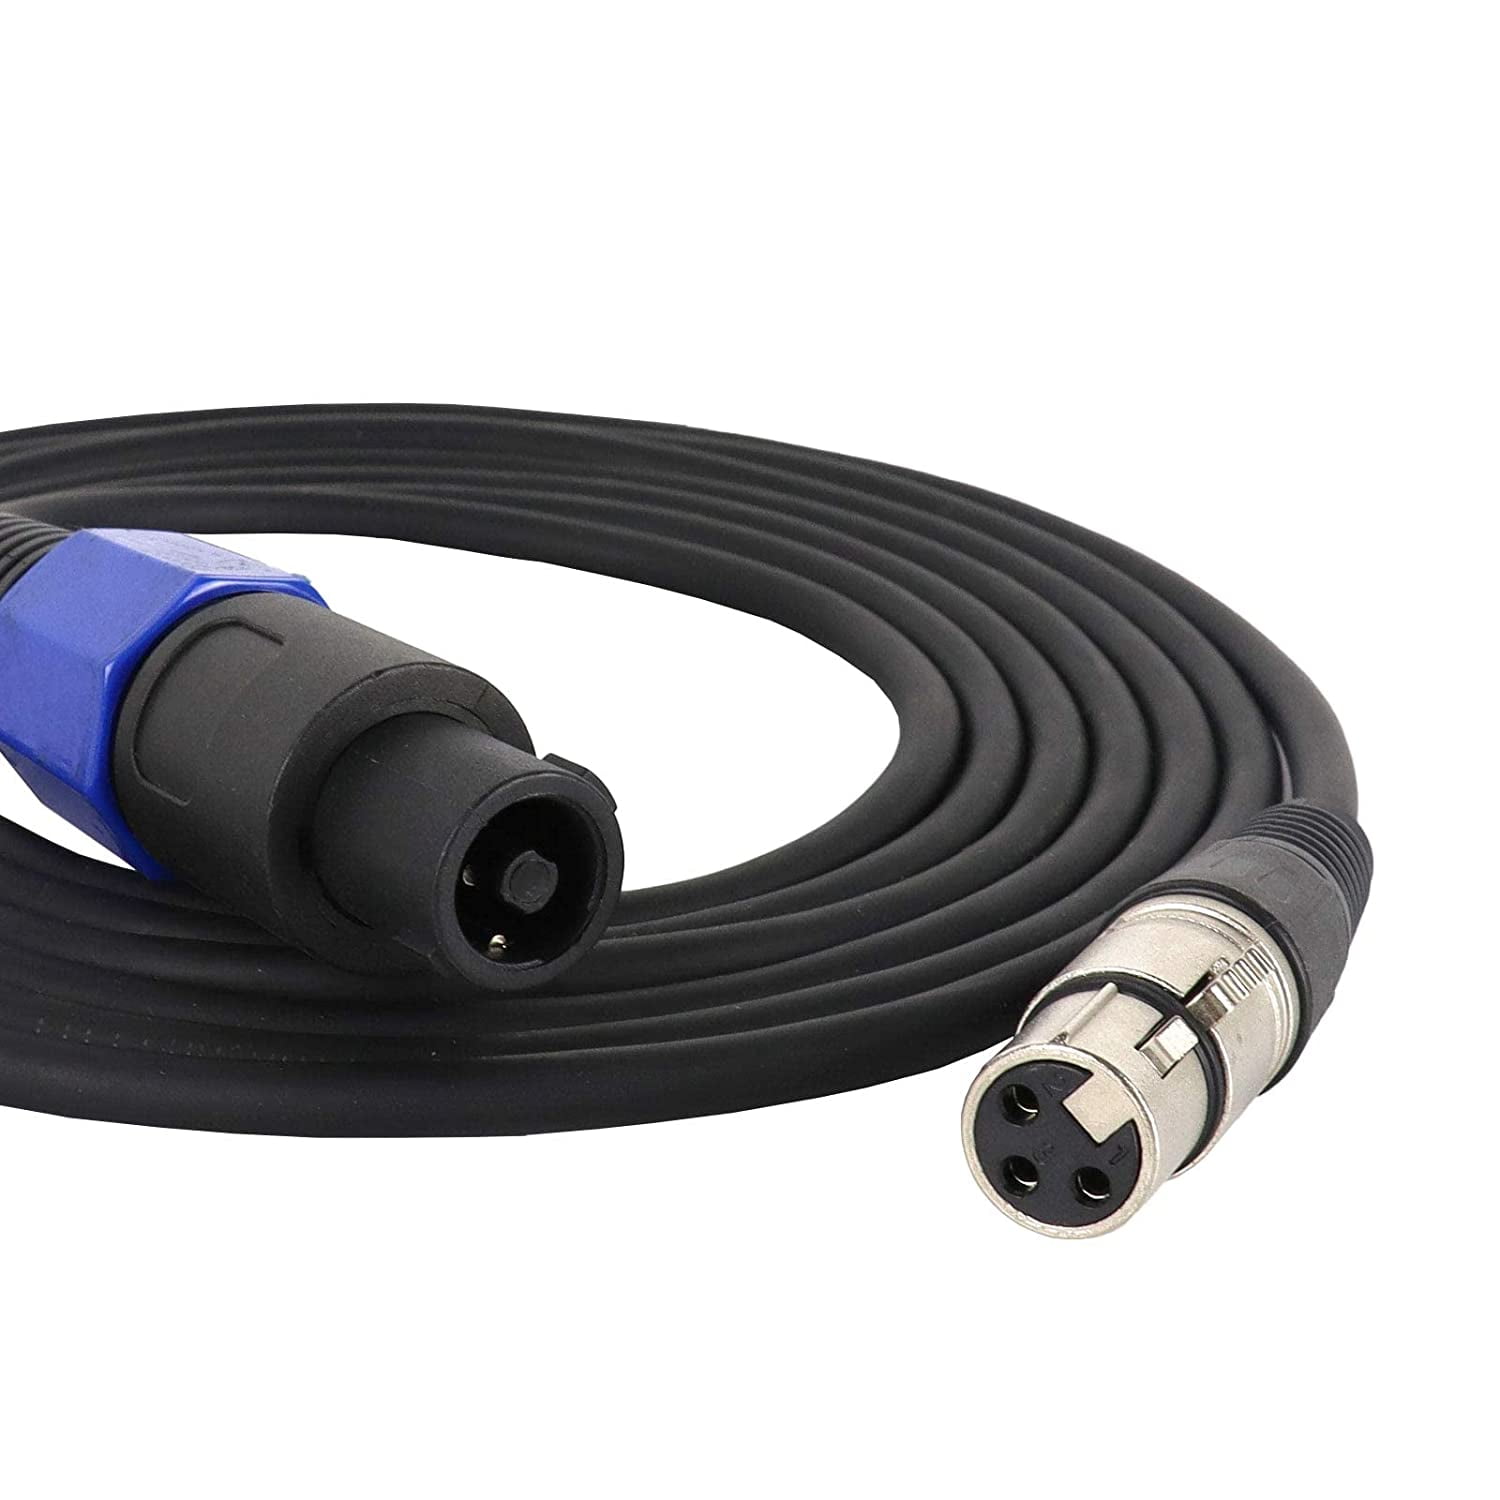 Eujgoov 20ft Mic Cable Cords, XLR Male To XLR Female Microphone